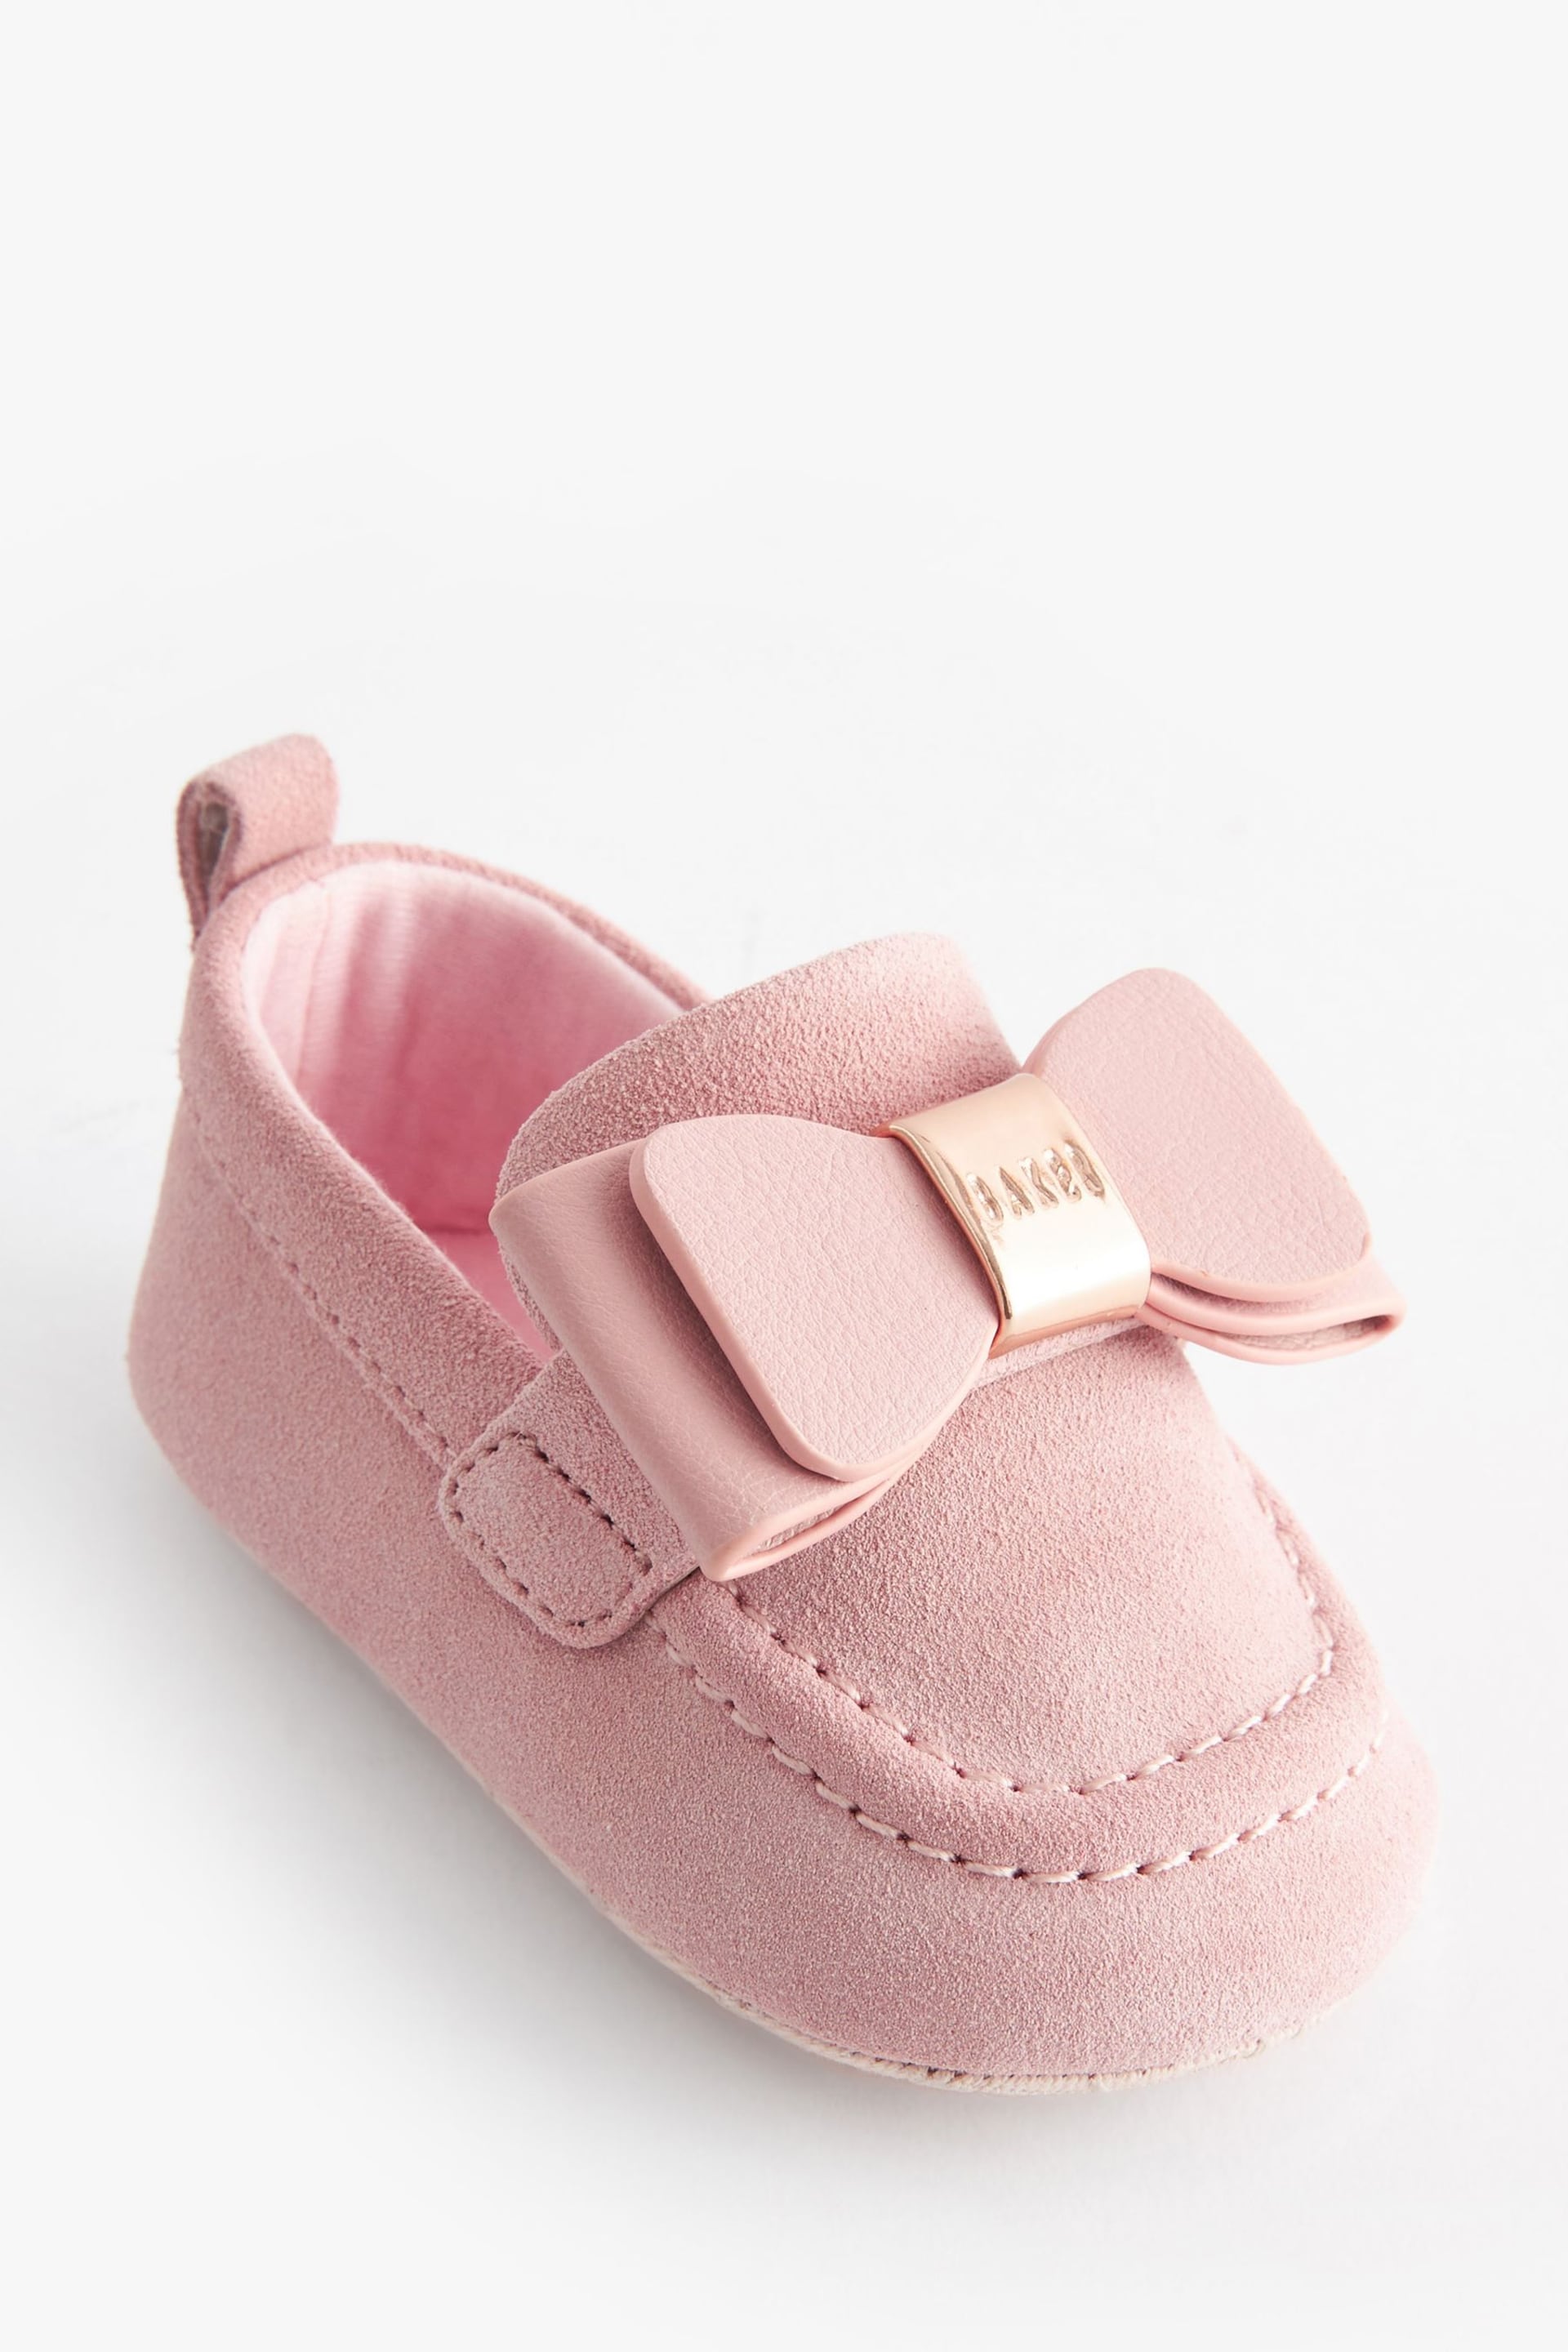 Baker by Ted Baker Baby Girls Loafers Padders with Bow - Image 1 of 6